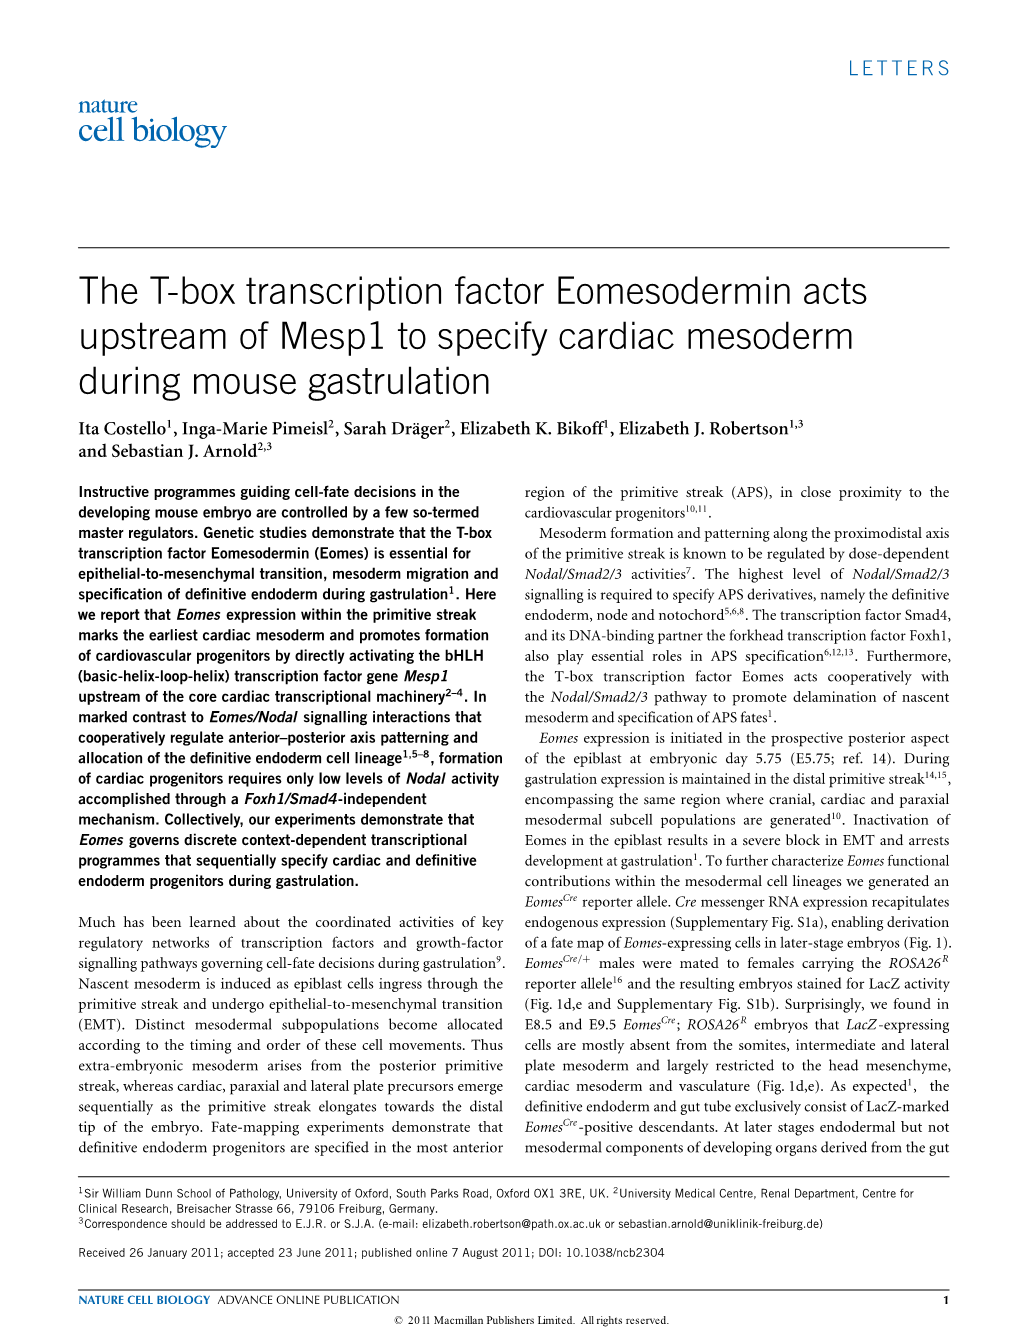 The T-Box Transcription Factor Eomesodermin Acts Upstream of Mesp1 to Specify Cardiac Mesoderm During Mouse Gastrulation